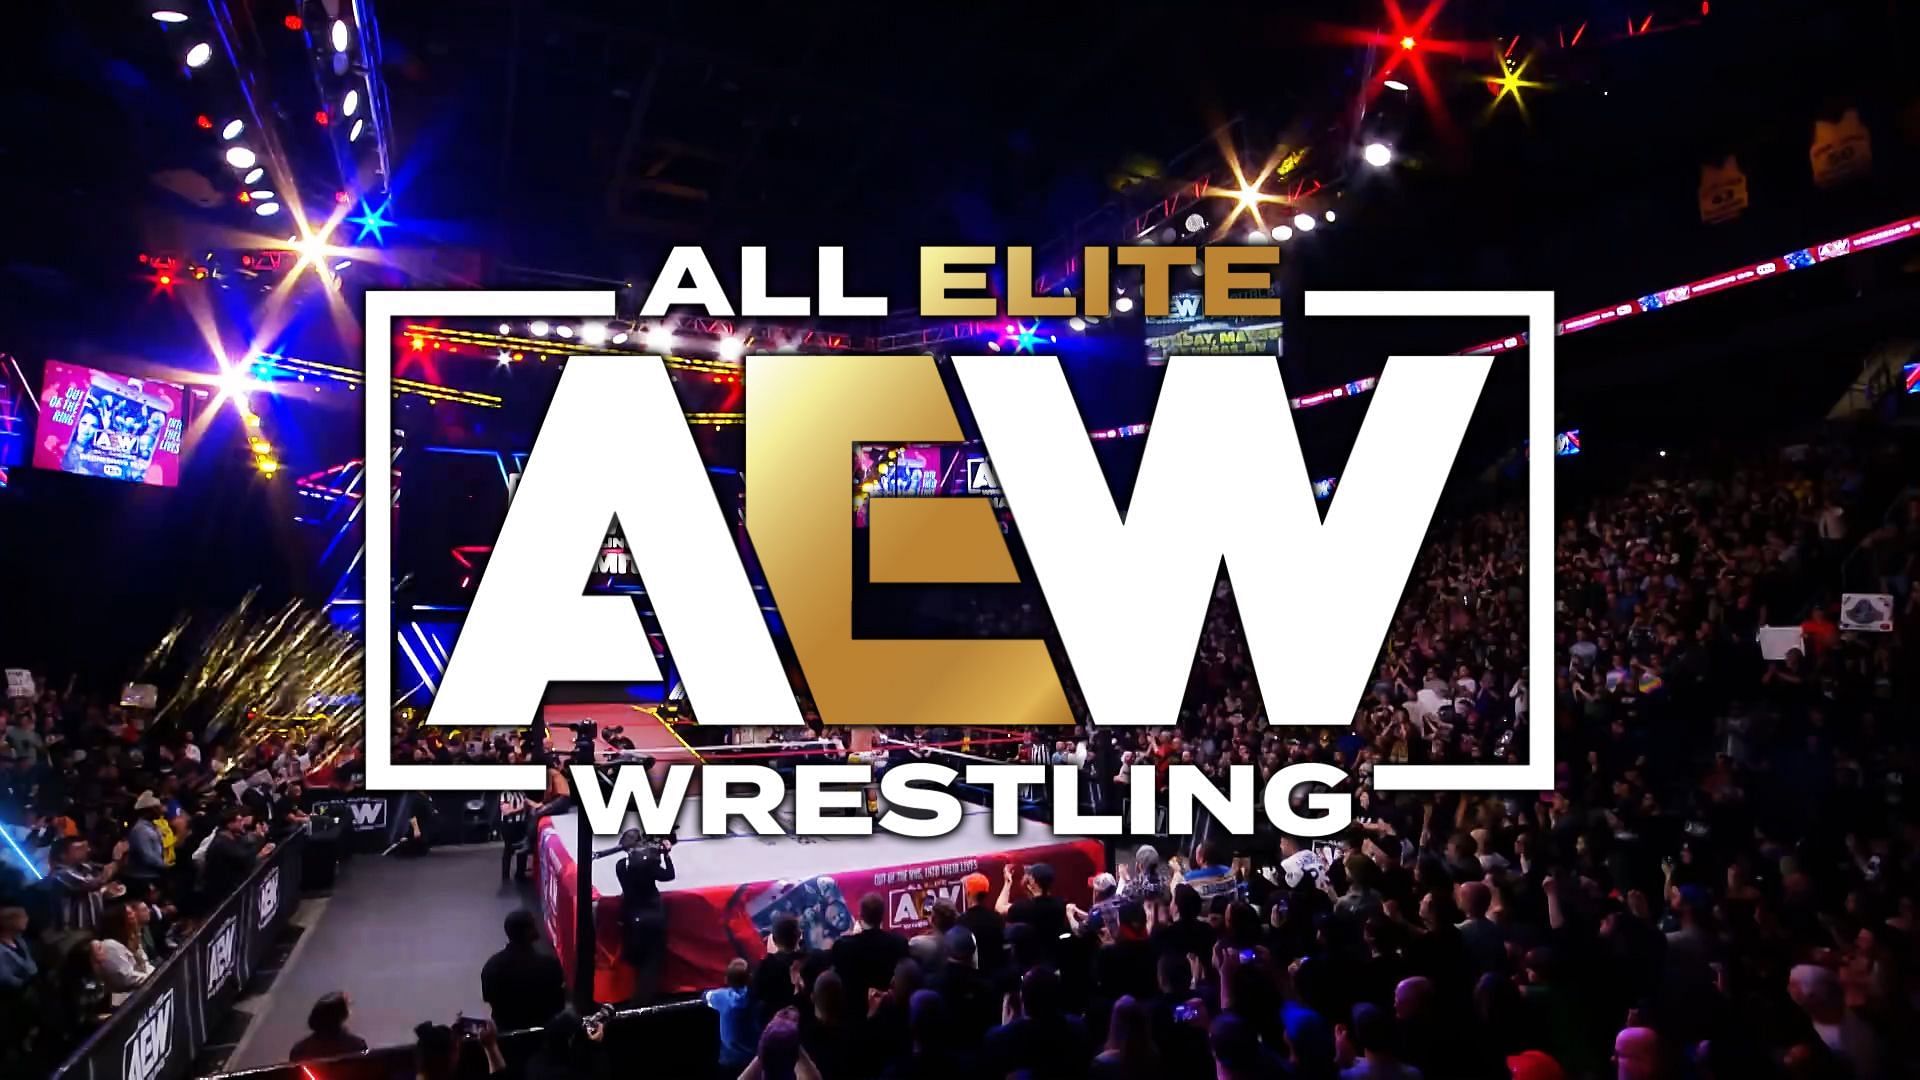 AEW recently produced its quarterly Battle of the Belts special